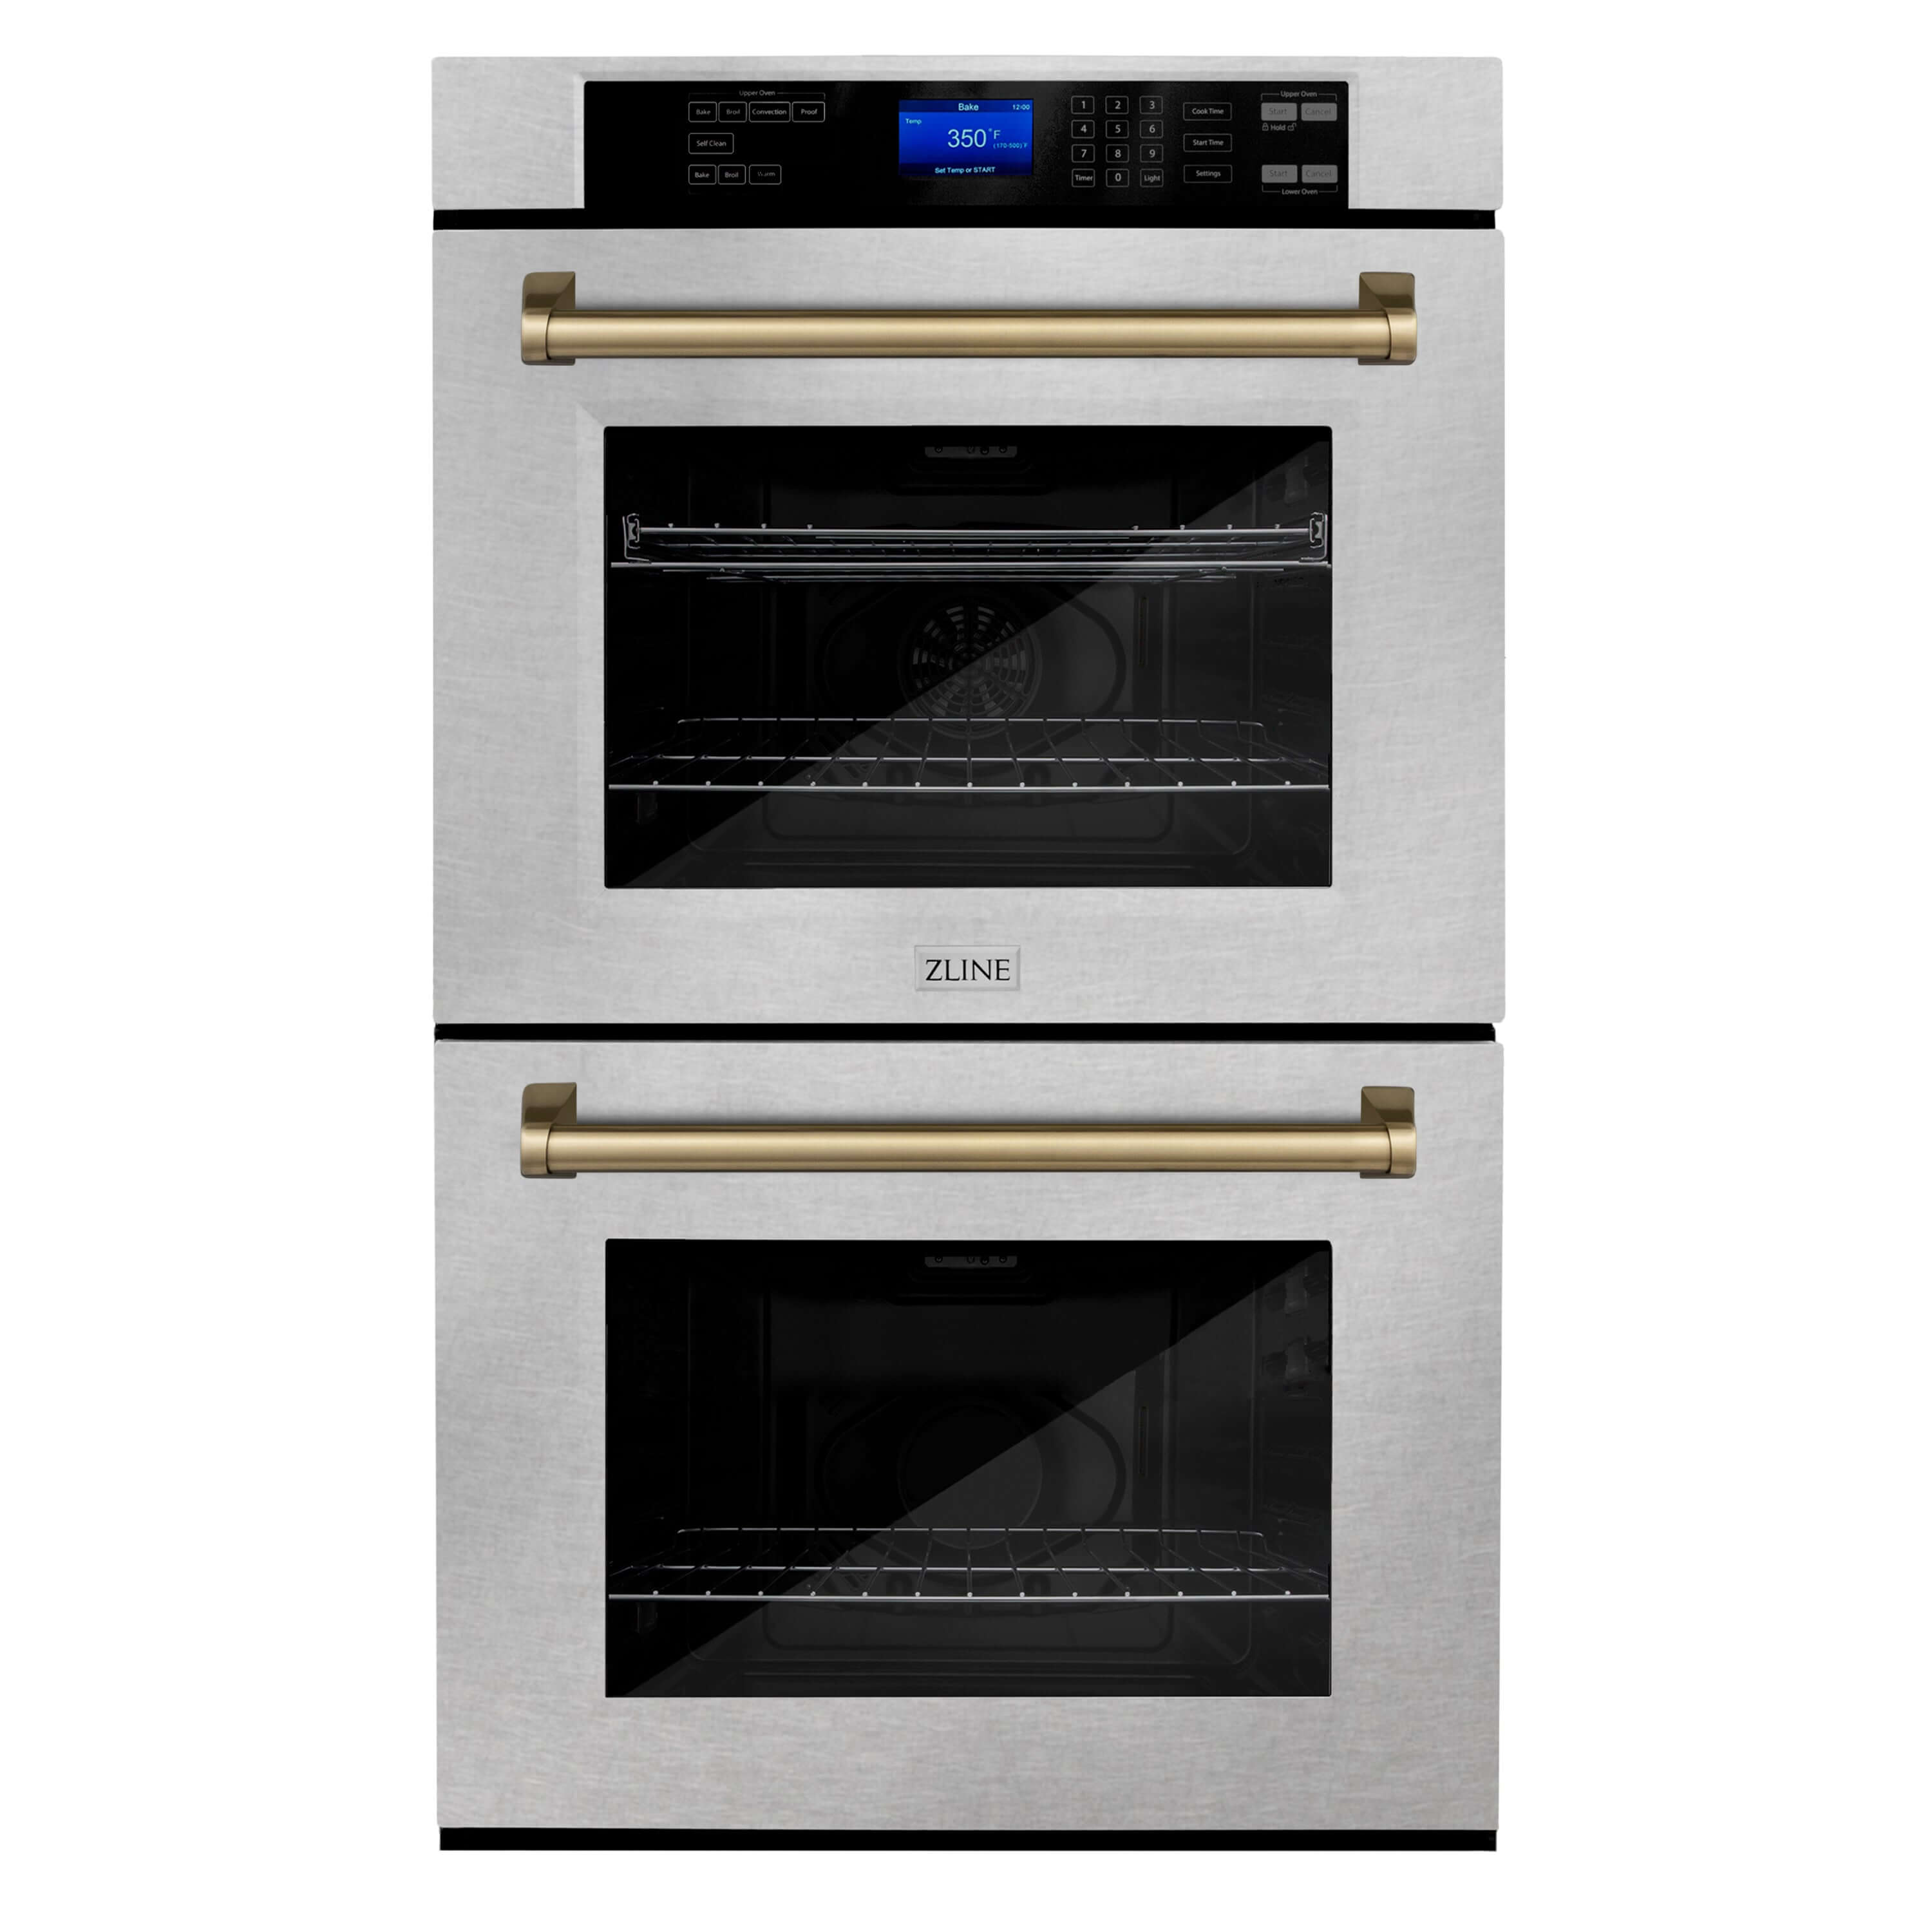 ZLINE 30" Autograph Edition Double Wall Oven with Self Clean and True Convection in Fingerprint Resistant Stainless Steel and Champagne Bronze (AWDSZ-30-CB)